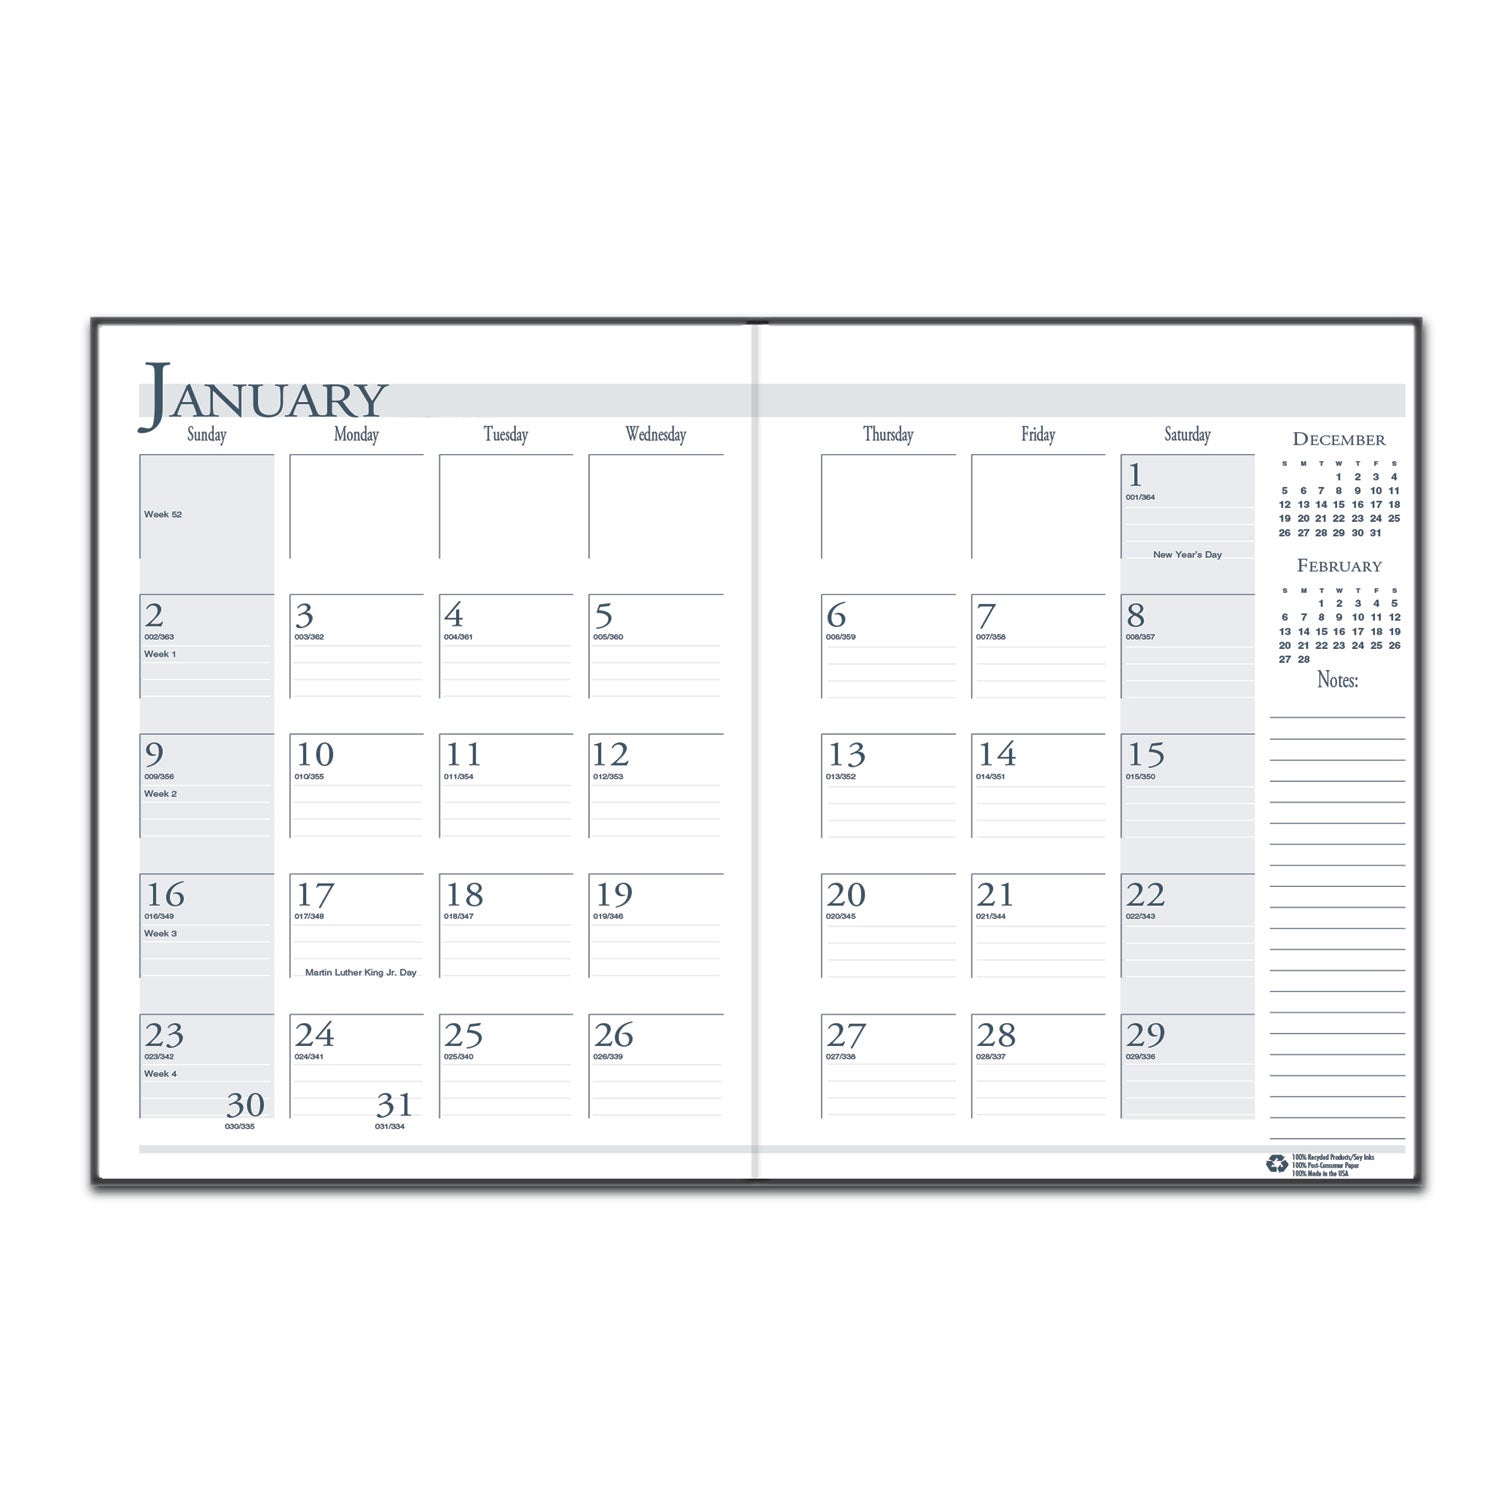 recycled-ruled-14-month-planner-with-leatherette-cover-10-x-7-black-cover-14-month-dec-to-jan-2023-to-2025_hod260602 - 2